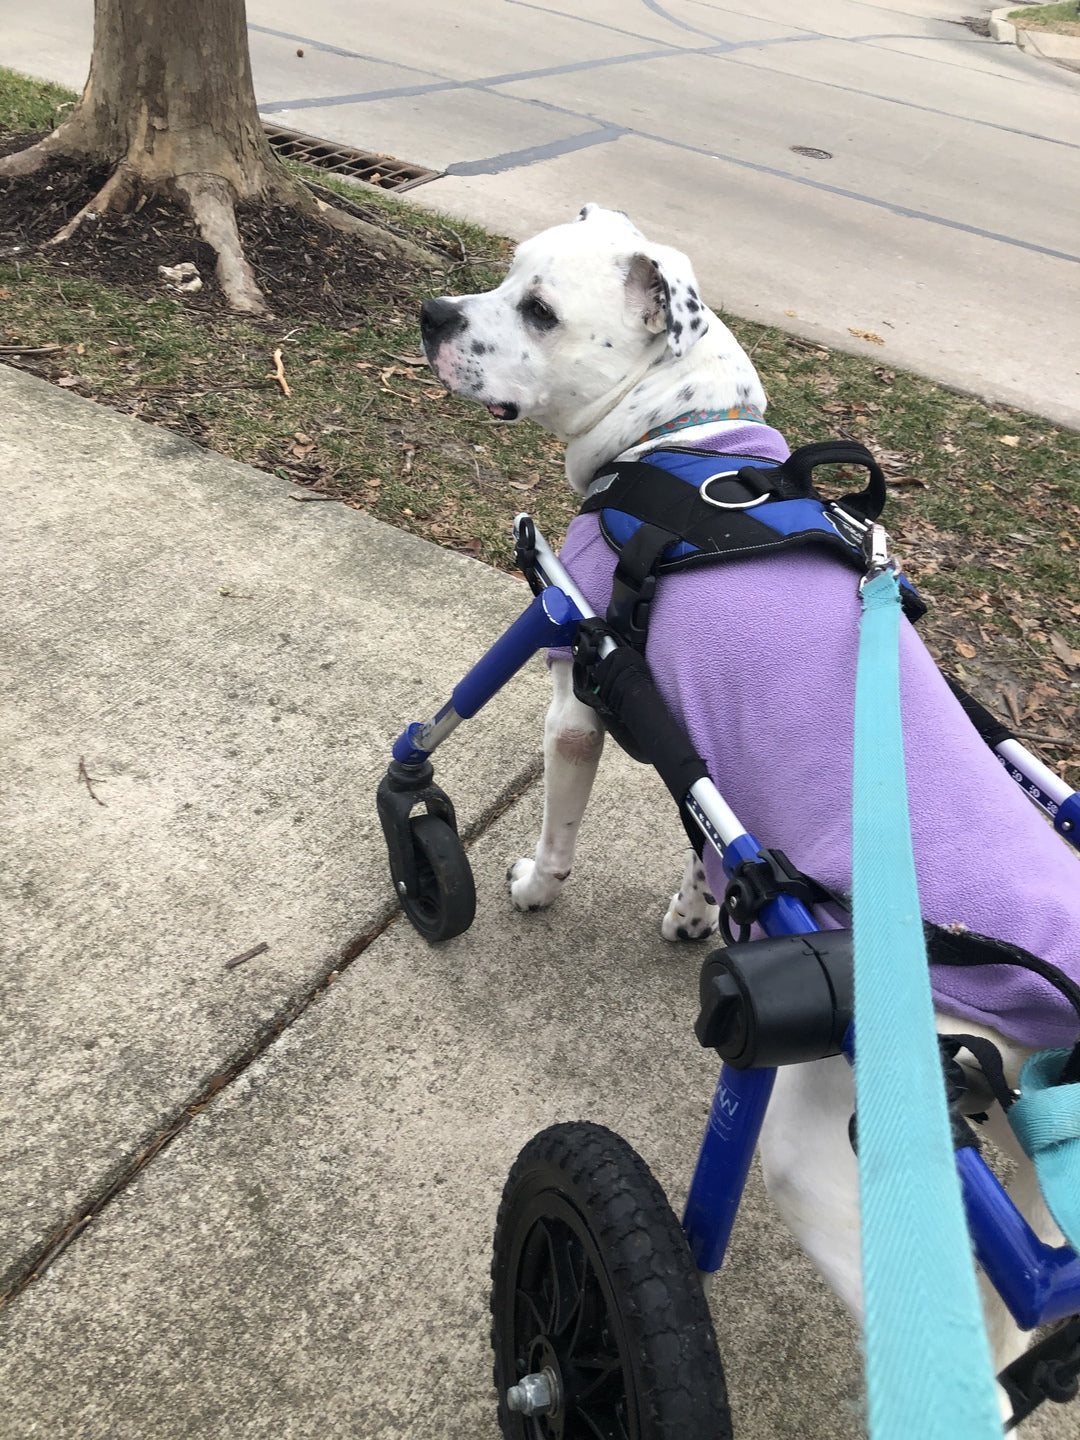 Harness Files | How the Joyride Harness Helps This Dog with Paralysis